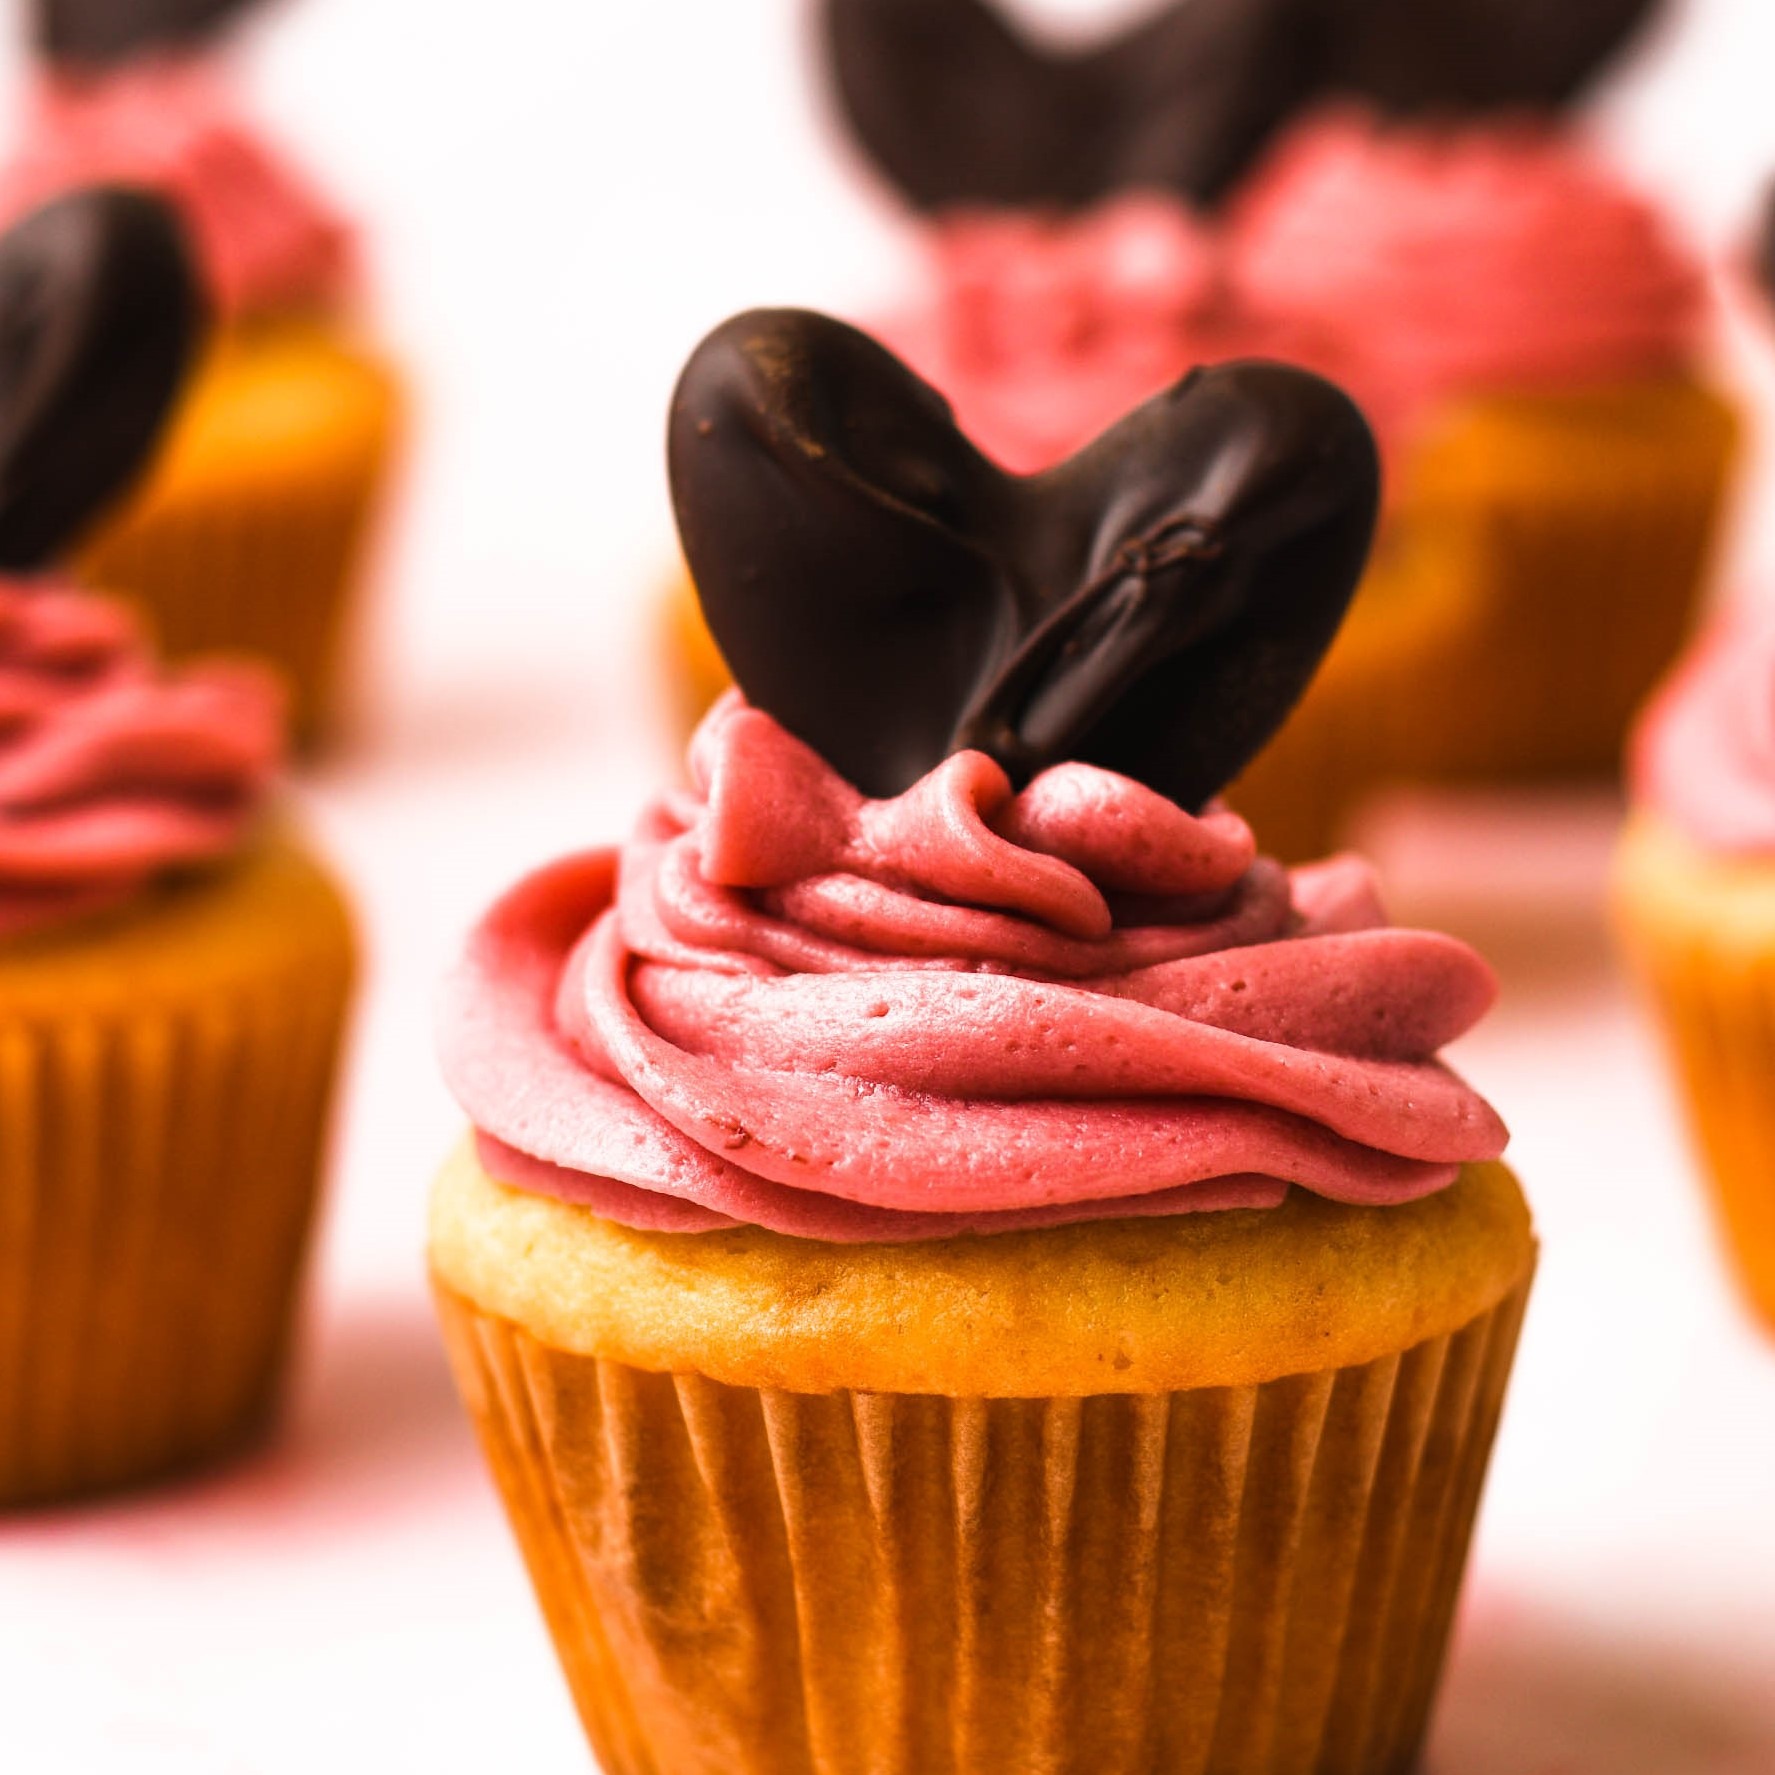 Strawberry Jam Cupcakes with Chocolate Heart